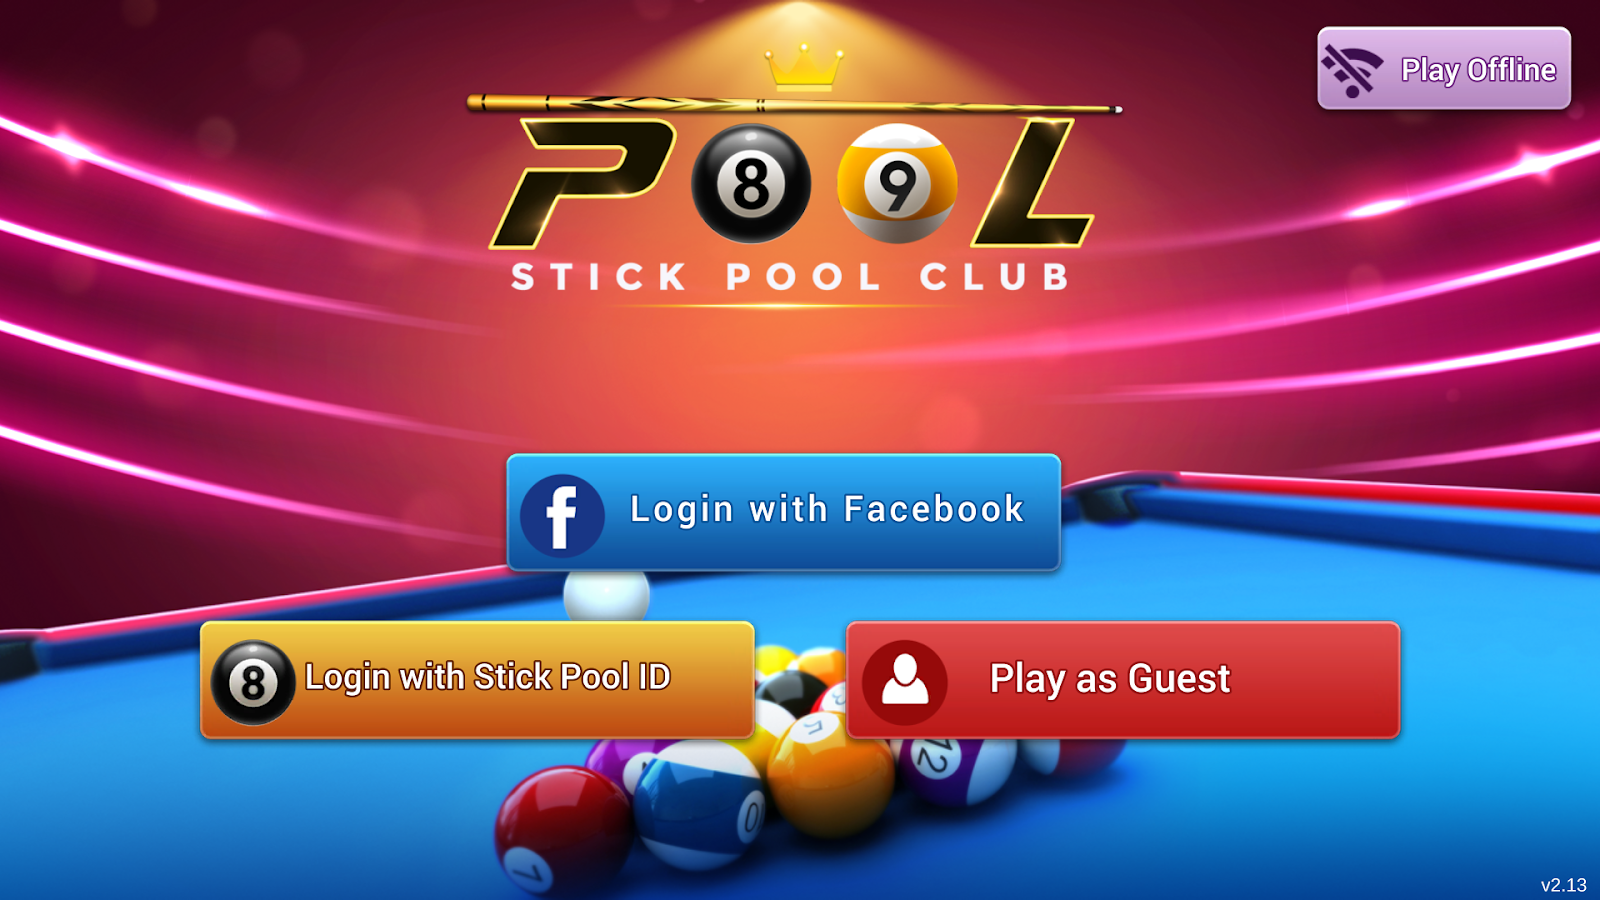 Stick Pool Club Is India S First Real Money 8 Ball Pool Game Where Users Can Earn Paytm Cash By Stick Pool Club Medium